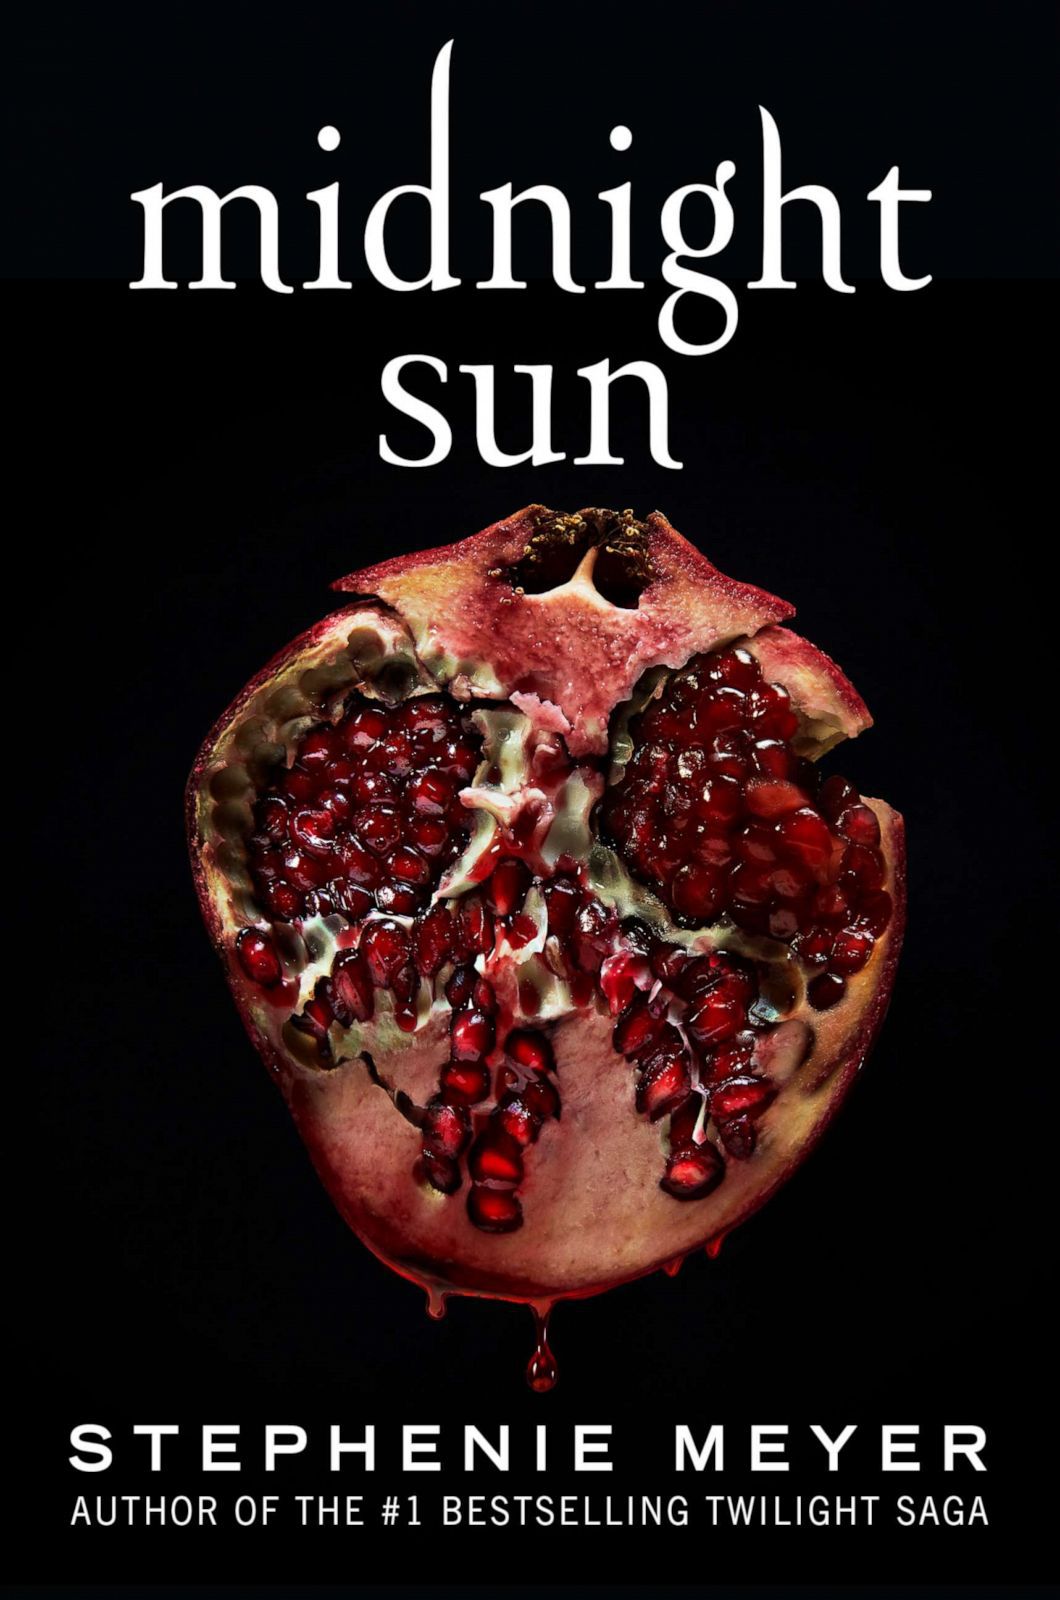 the cover for midnight sun, featuring a lush pomegranate 